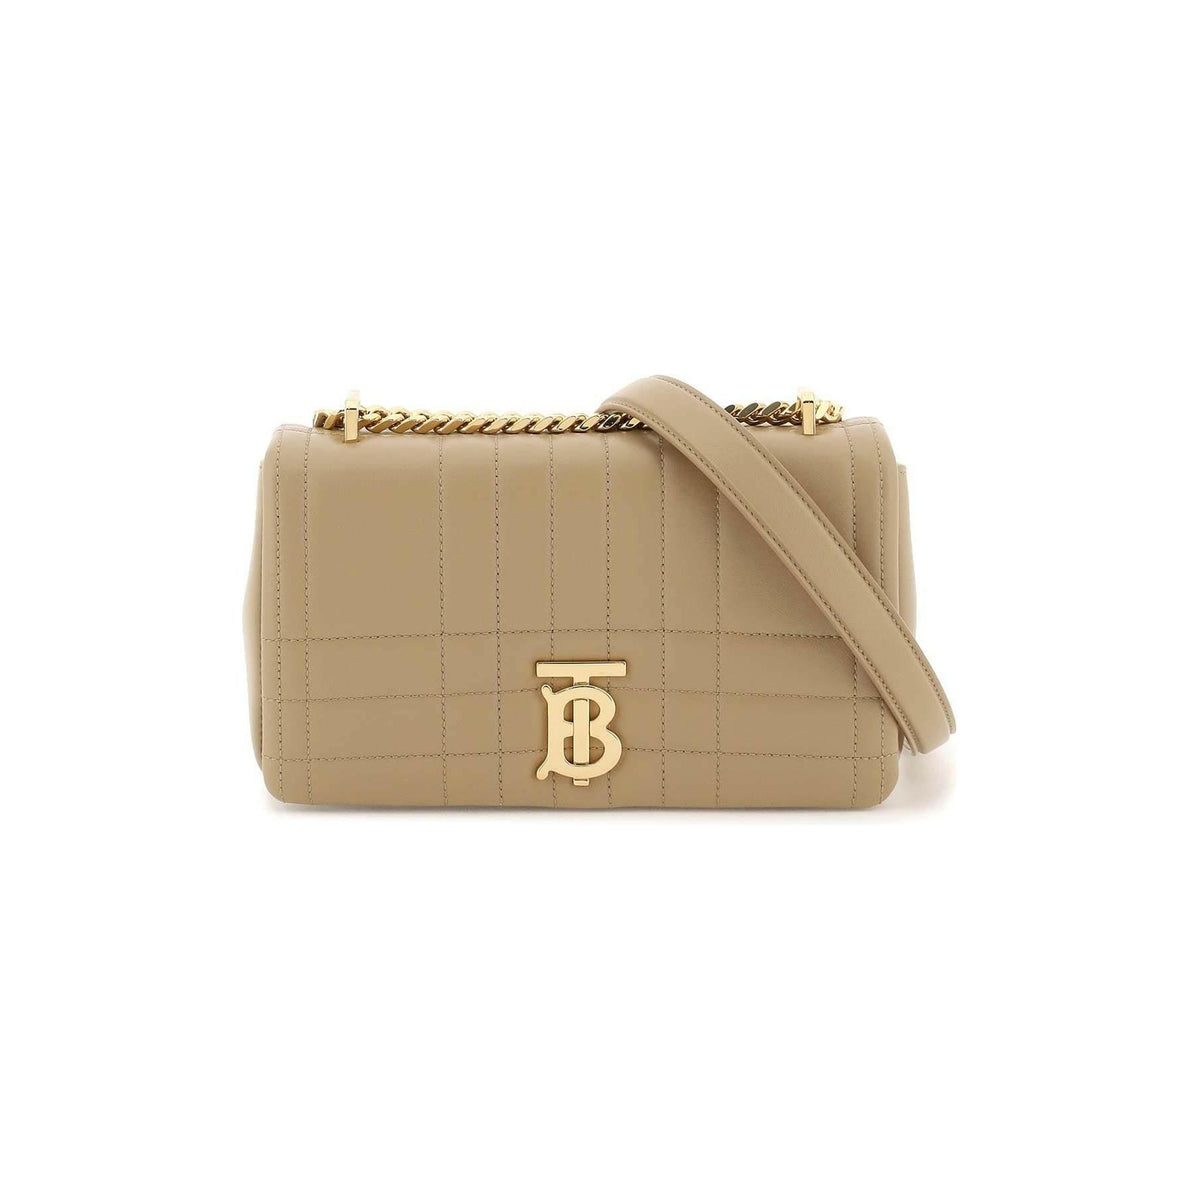 BURBERRY - Oat Beige Quilted Leather Small Lola Bag - JOHN JULIA